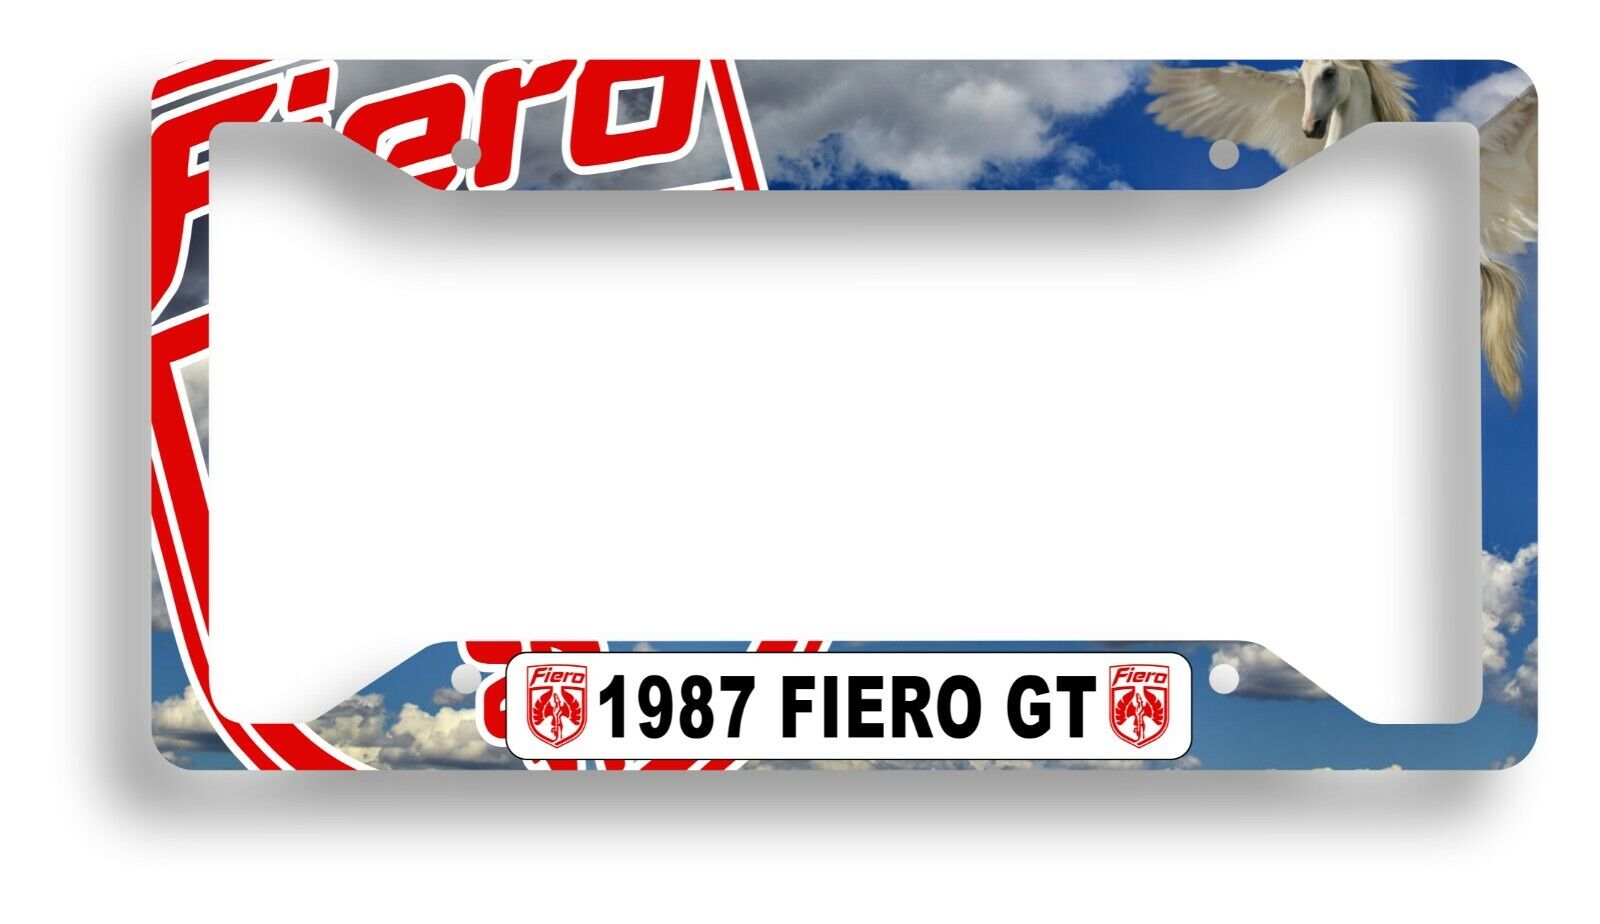 Pontiac Fiero GT License Plate Frame - Personalized - MADE IN USA - NEW DESIGNS